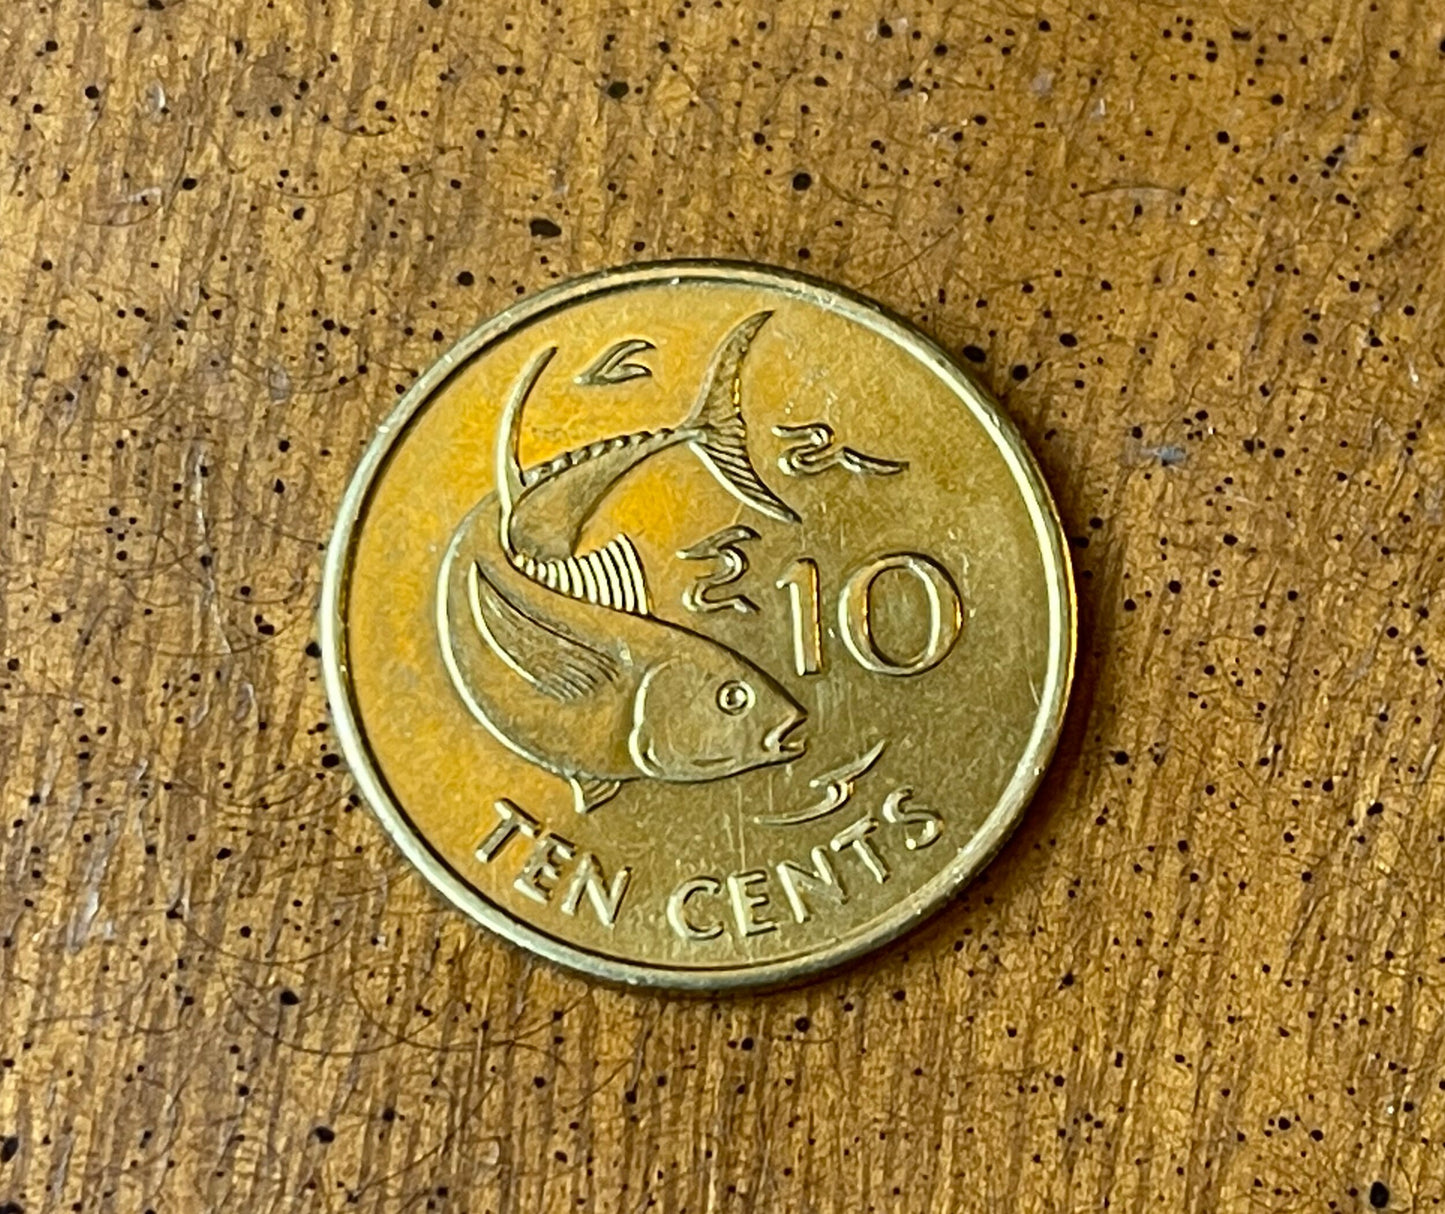 Tuna Seychelles Authentic Coin Money for Jewelry and Craft Making